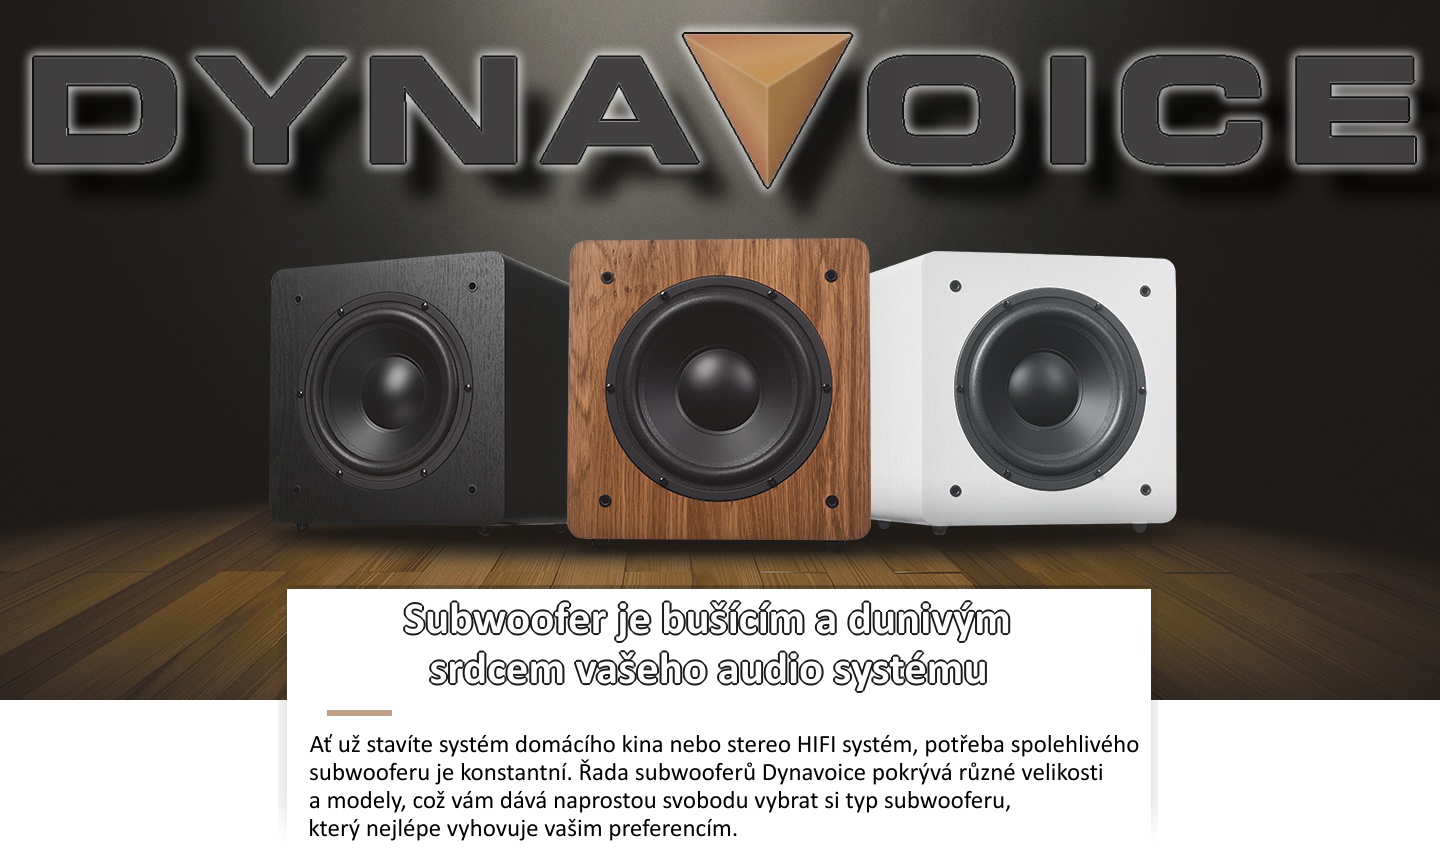 Dynavoice subwoofers